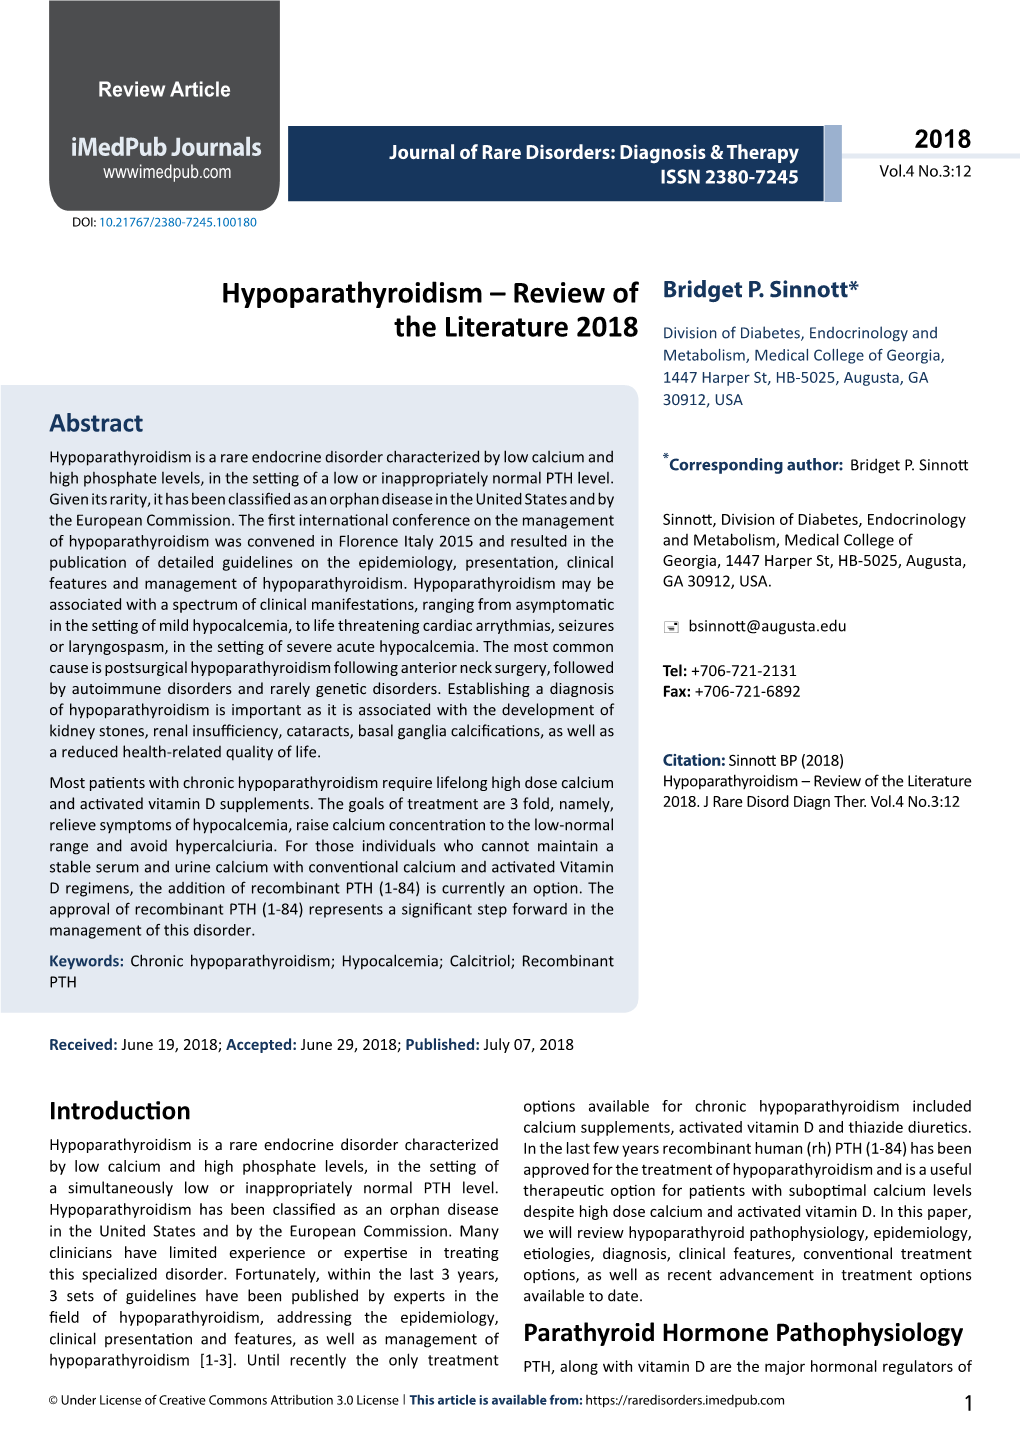 Hypoparathyroidism – Review of the Literature 2018